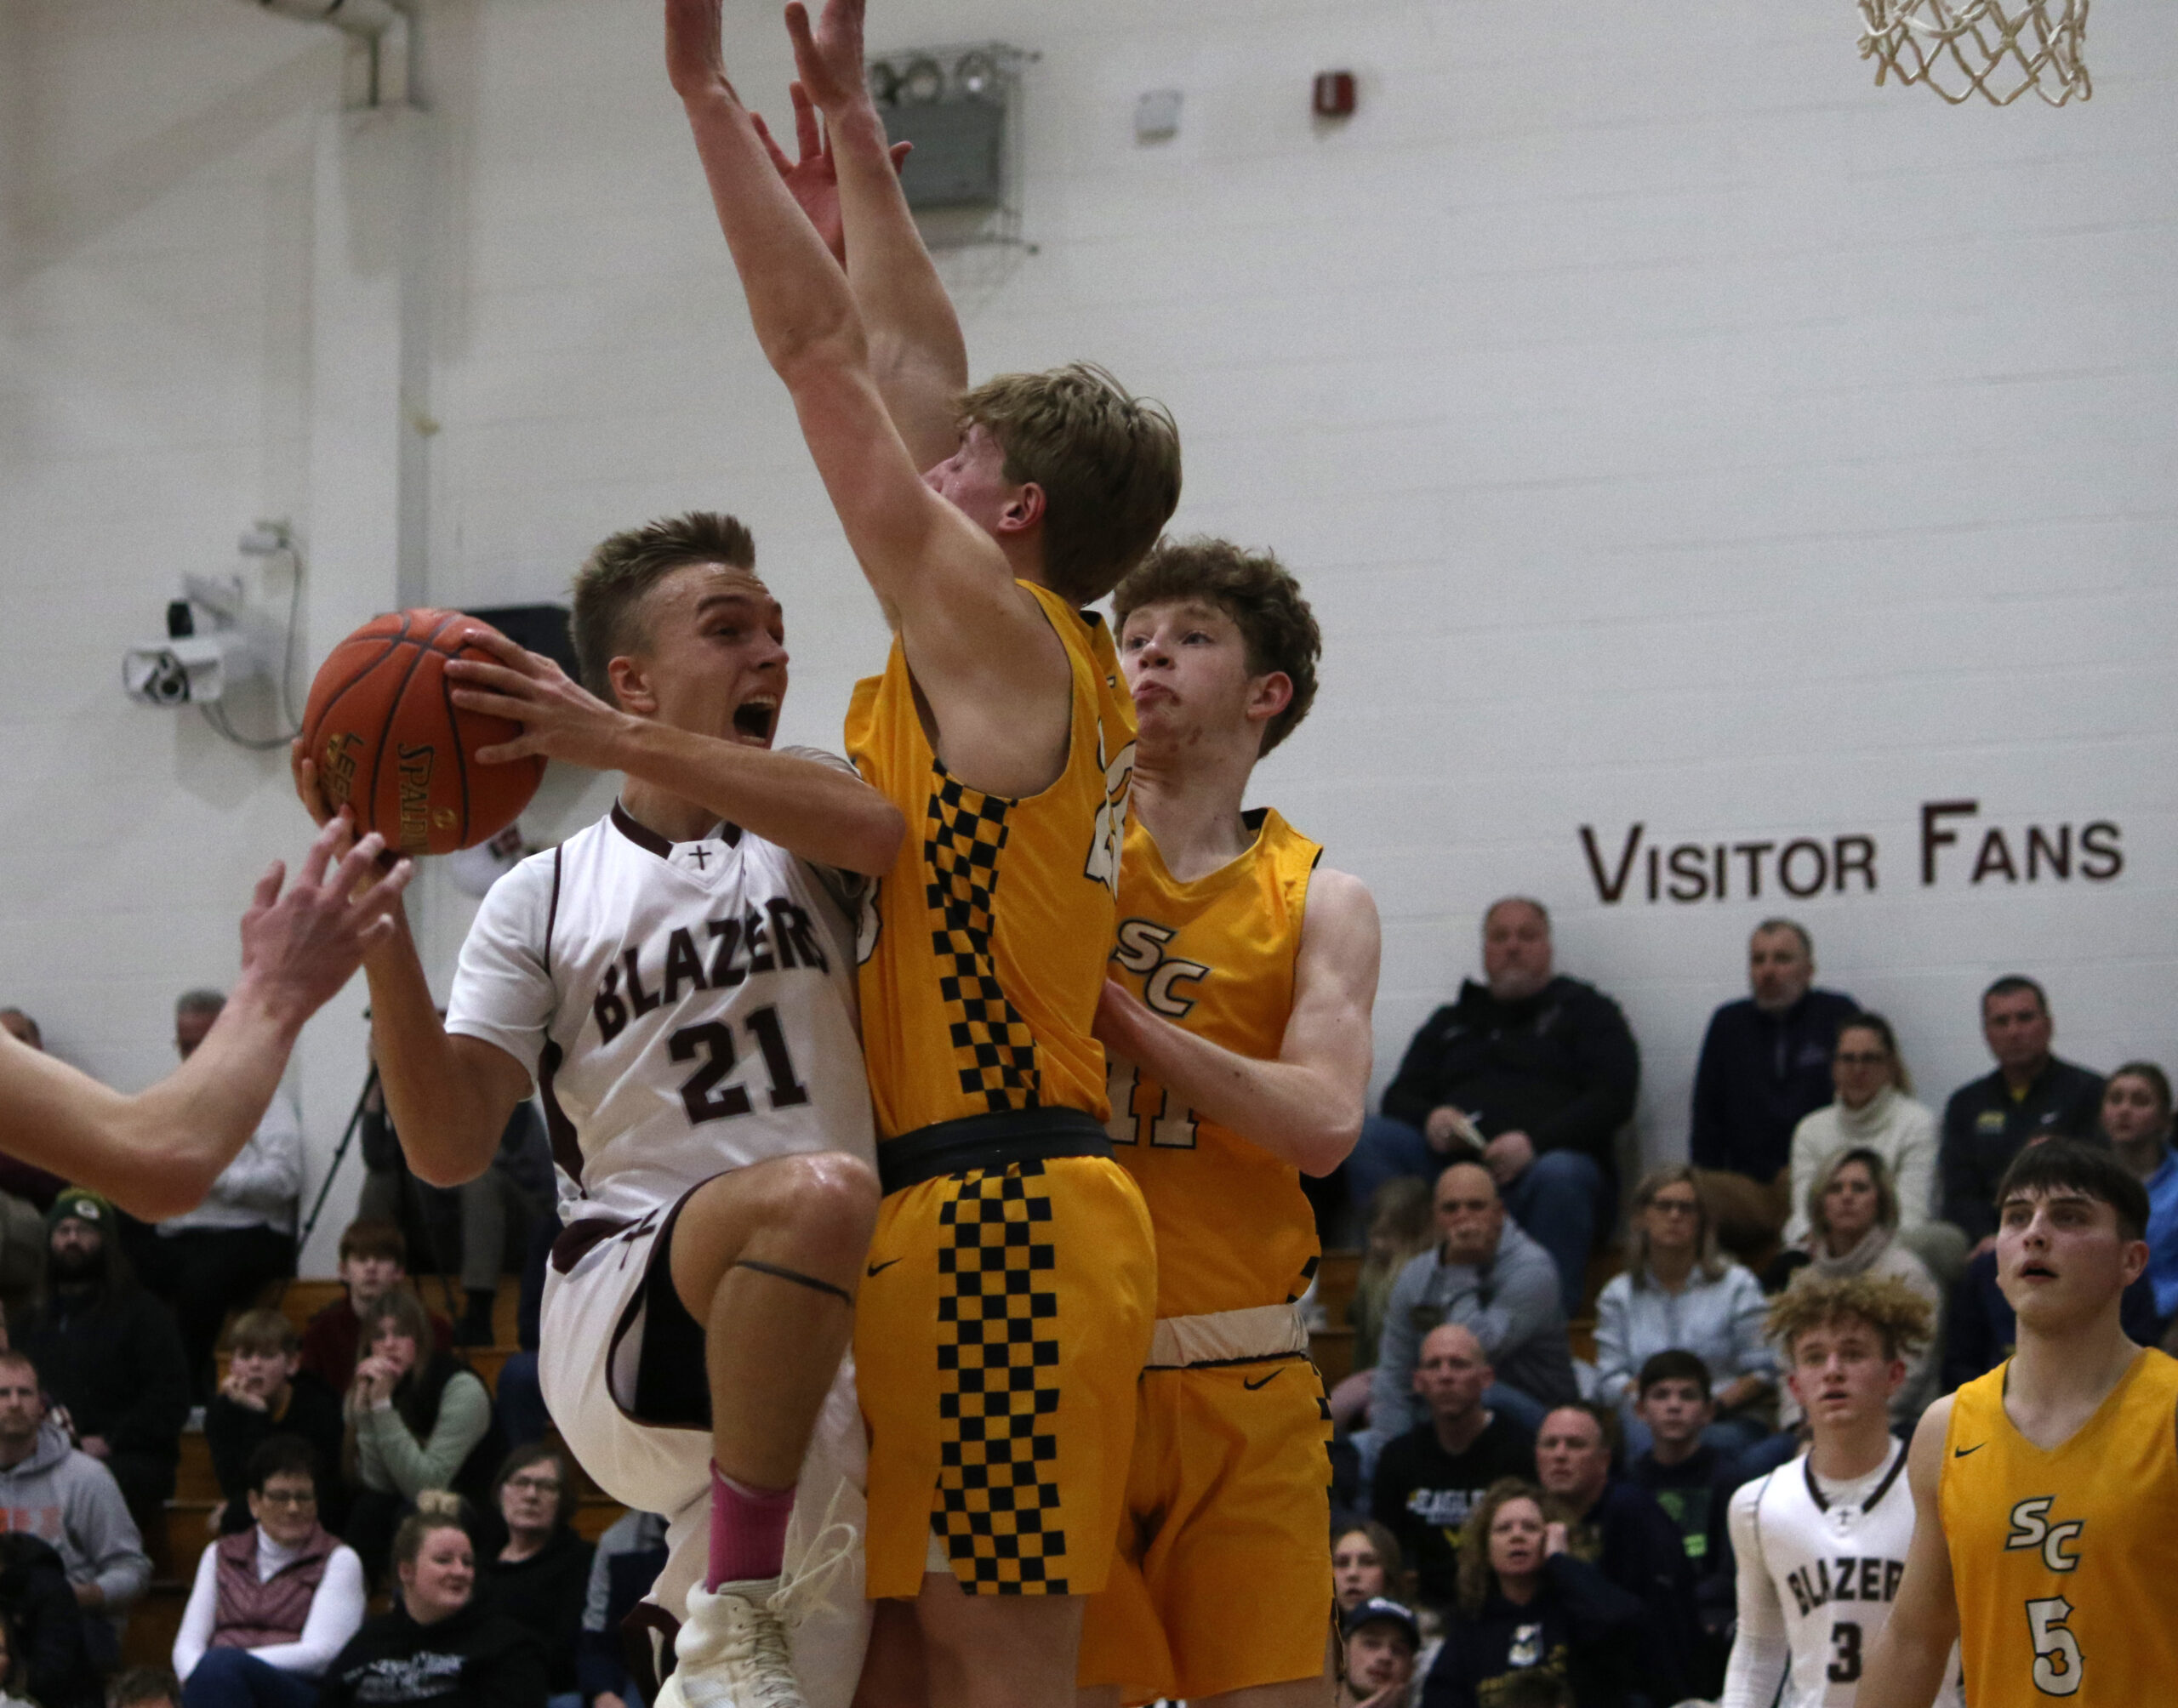 N.E.W. Lutheran survives playoff opener